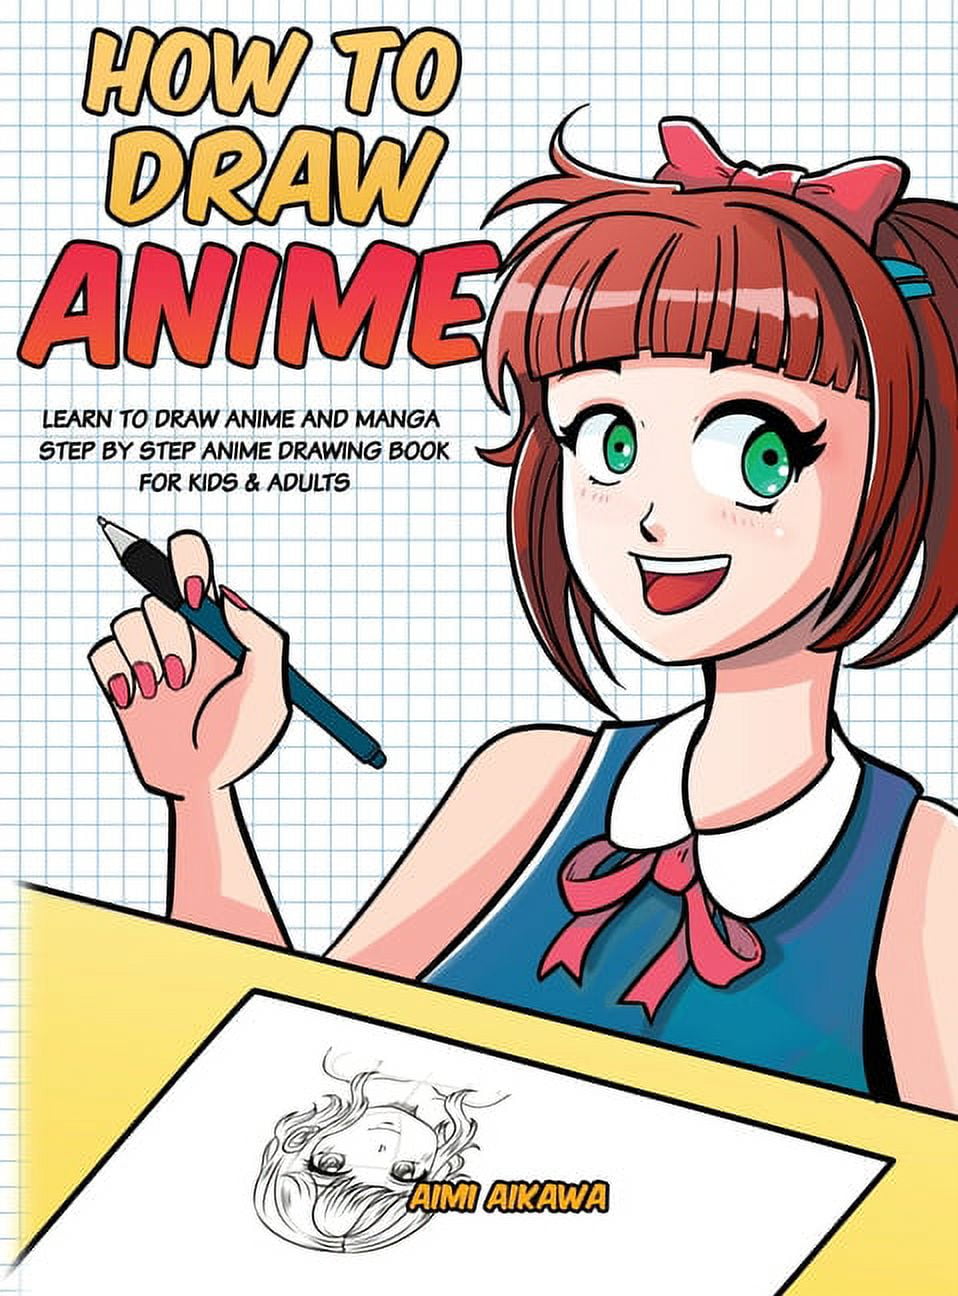 How to draw Naruto: drawing anime step by step, drawing Manga step by step,  How To Draw Anime For Kids, How To Draw Anime For Adults, How To Draw manga  For Kids